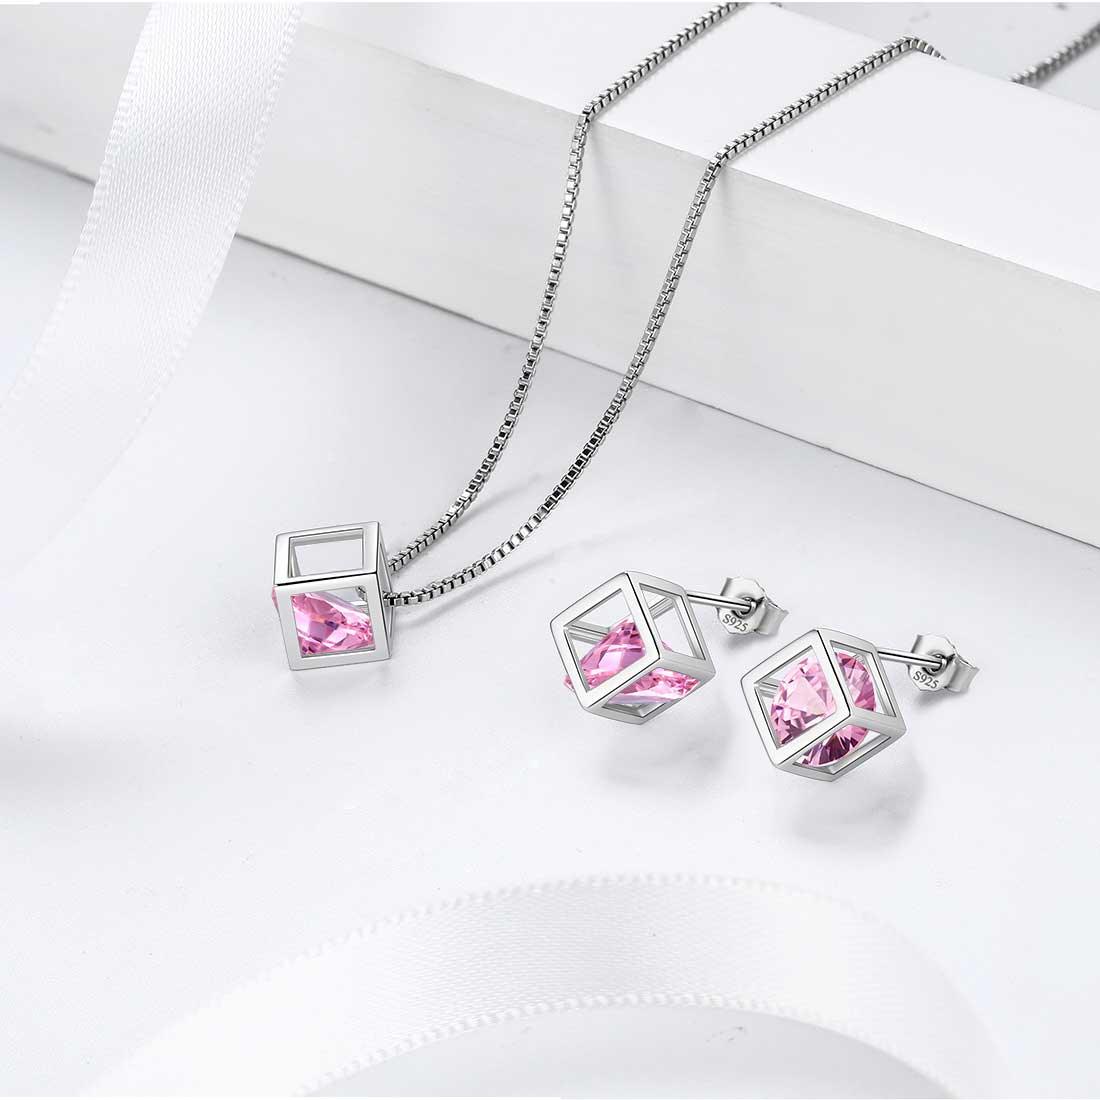 3D Cube Birthstone October Tourmaline Necklace Sterling Silver - Necklaces - Aurora Tears